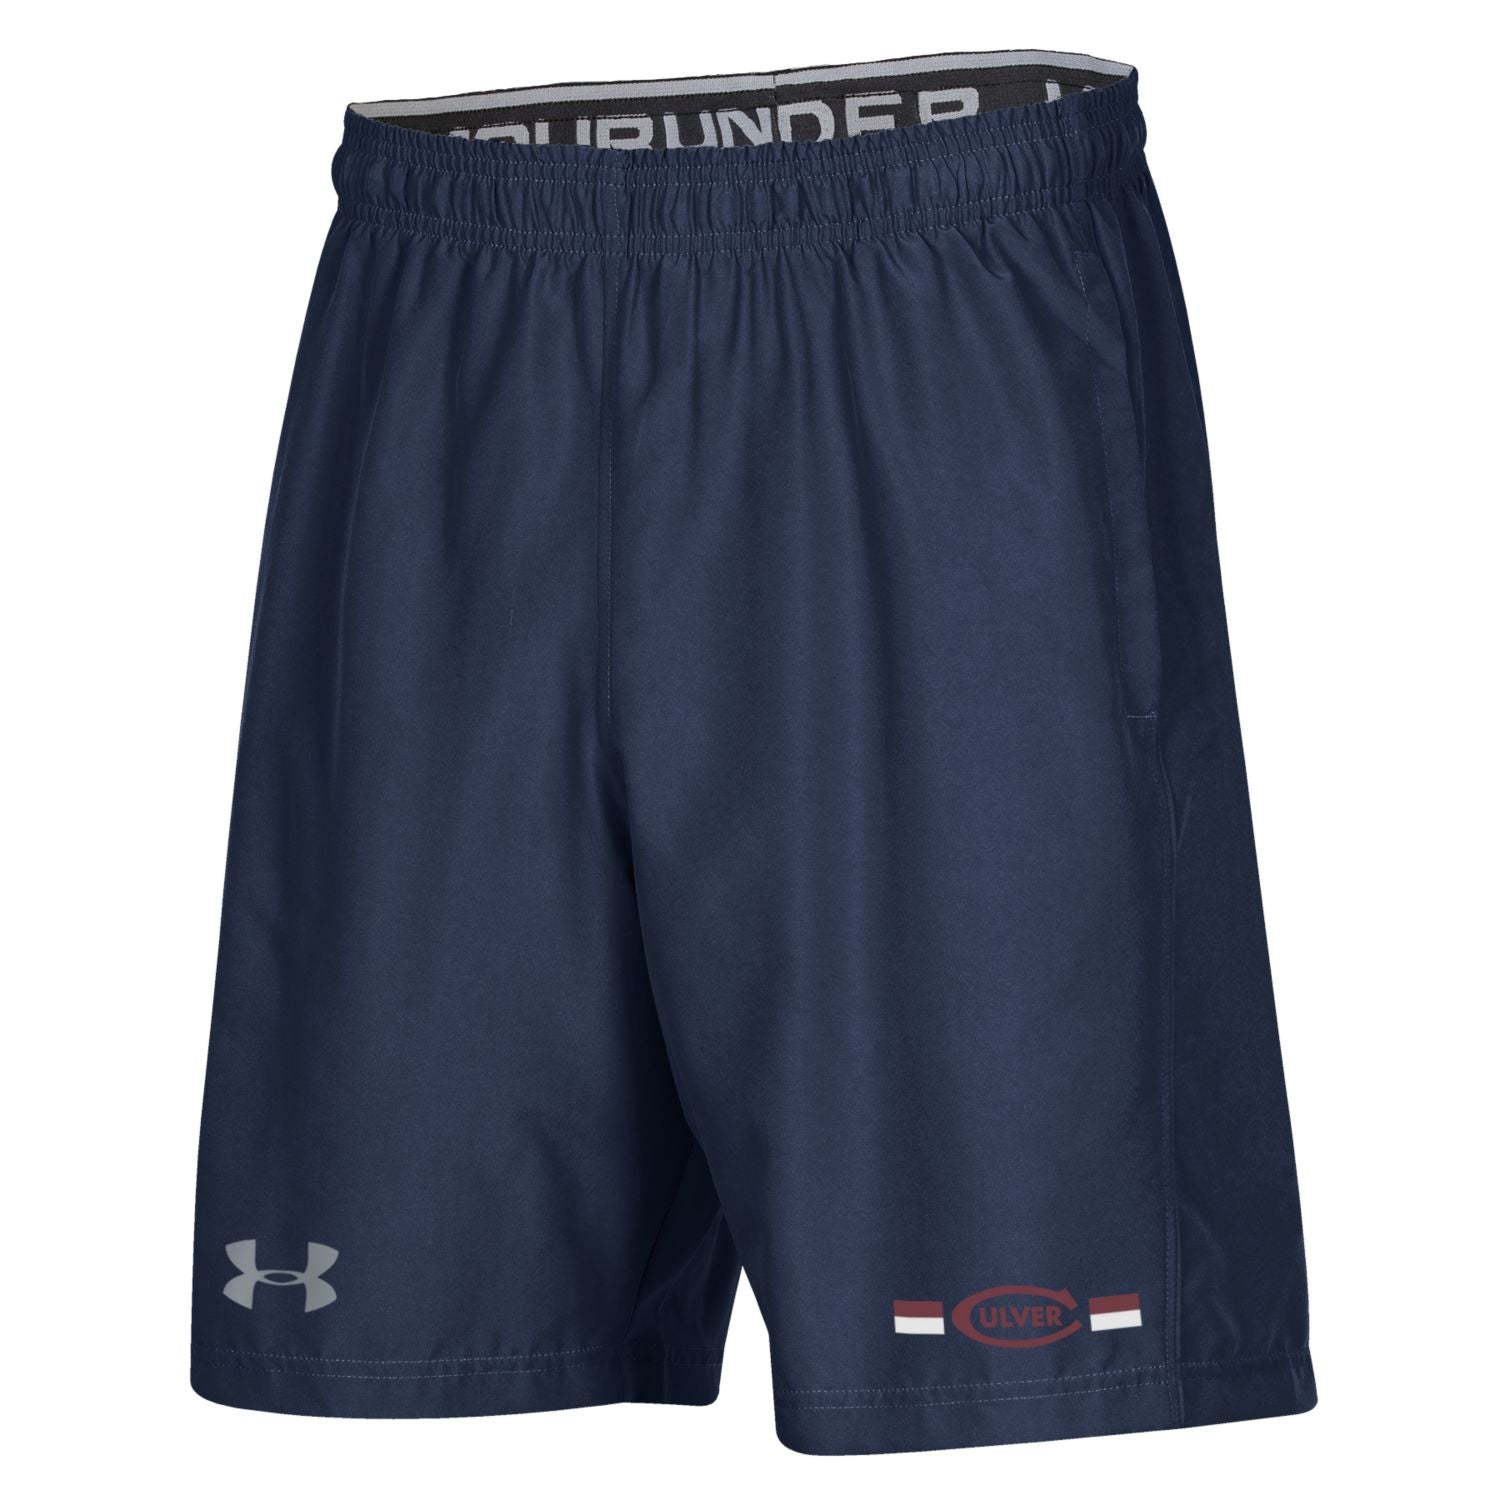 Under Armour Woven Graphic Short - Navy